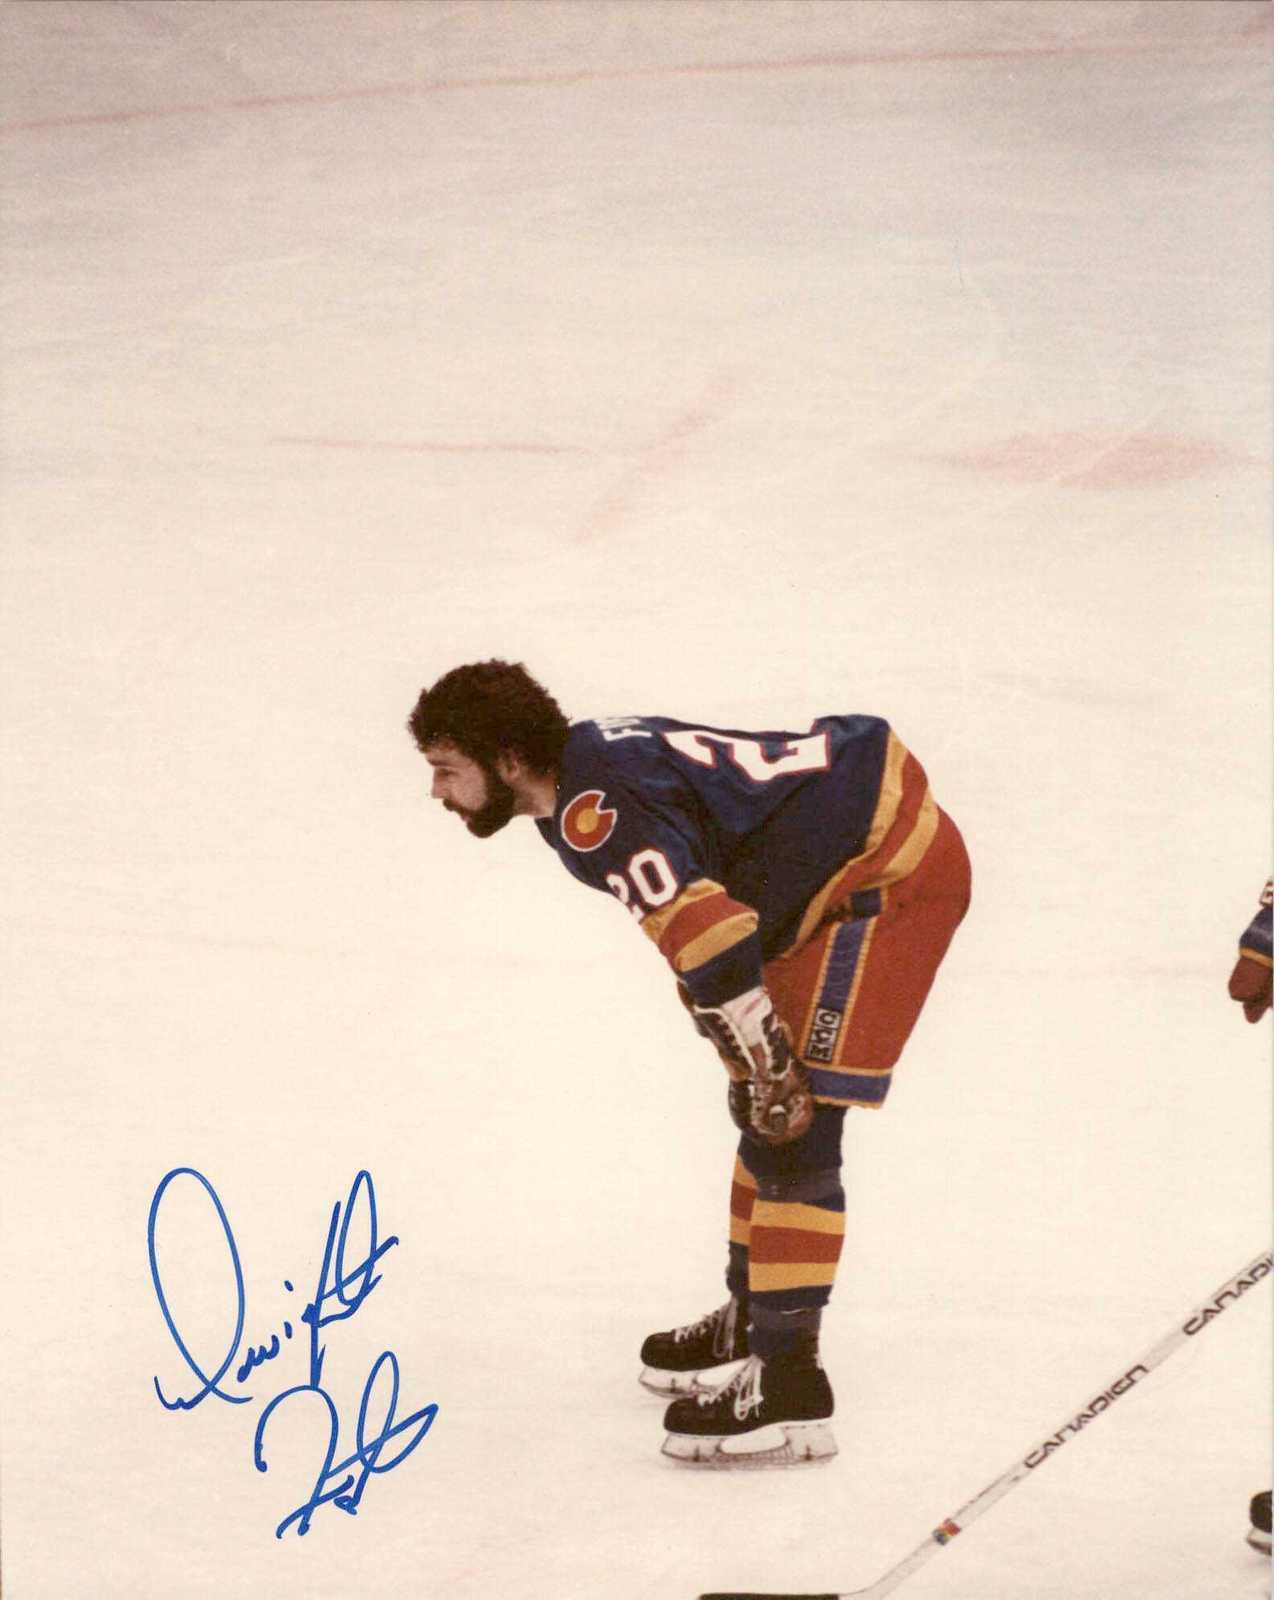 Primary image for Dwight Foster Signed Autographed NHL Glossy 8x10 Photo - Colorado Avalanche